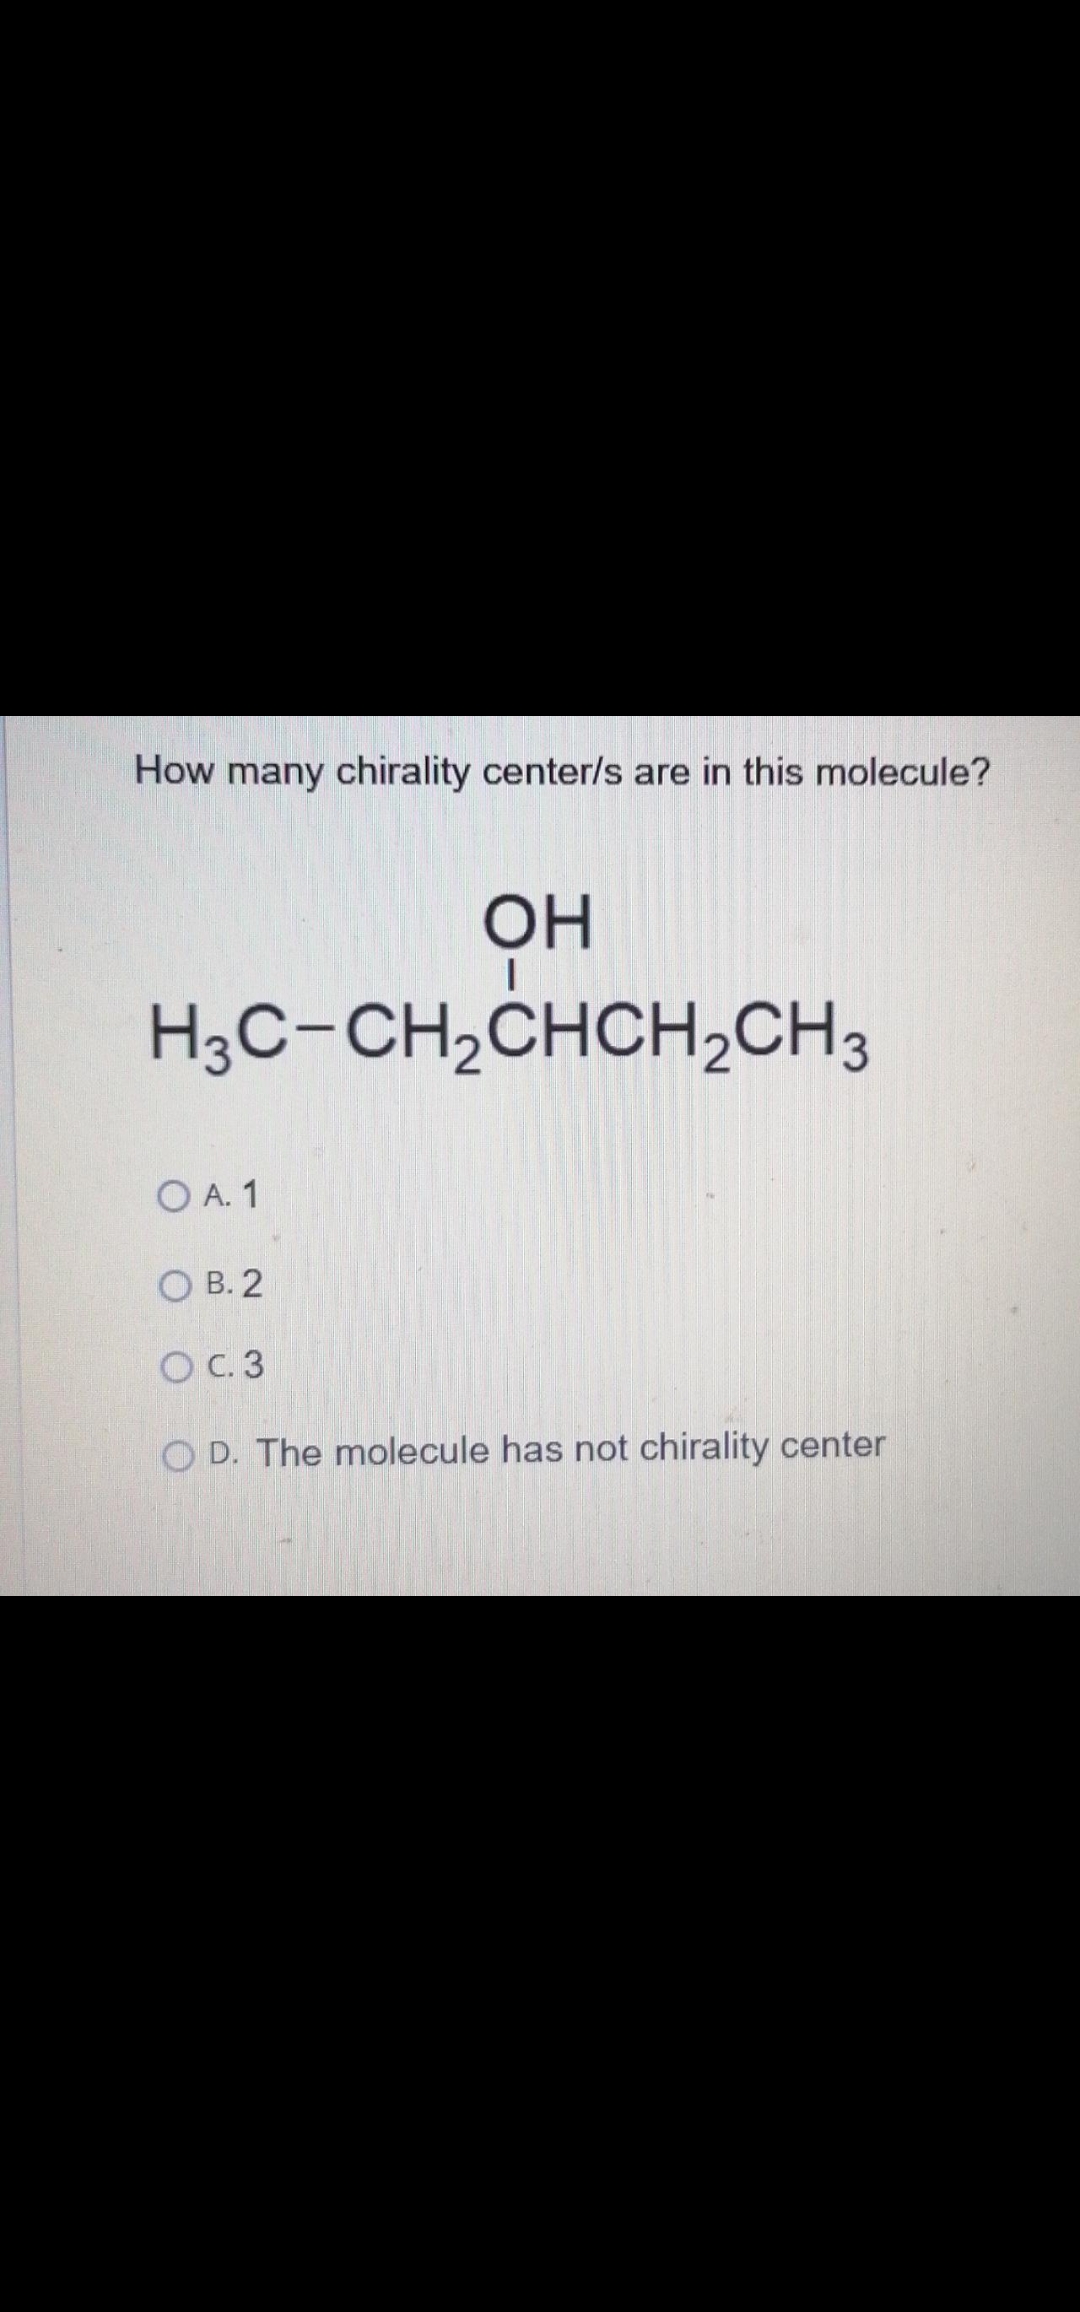 How many chirality center/s are in this molecule?
OH
H3C-CH2CHCH2CH3
O A. 1
О В. 2
OC.3
O D. The molecule has not chirality center
